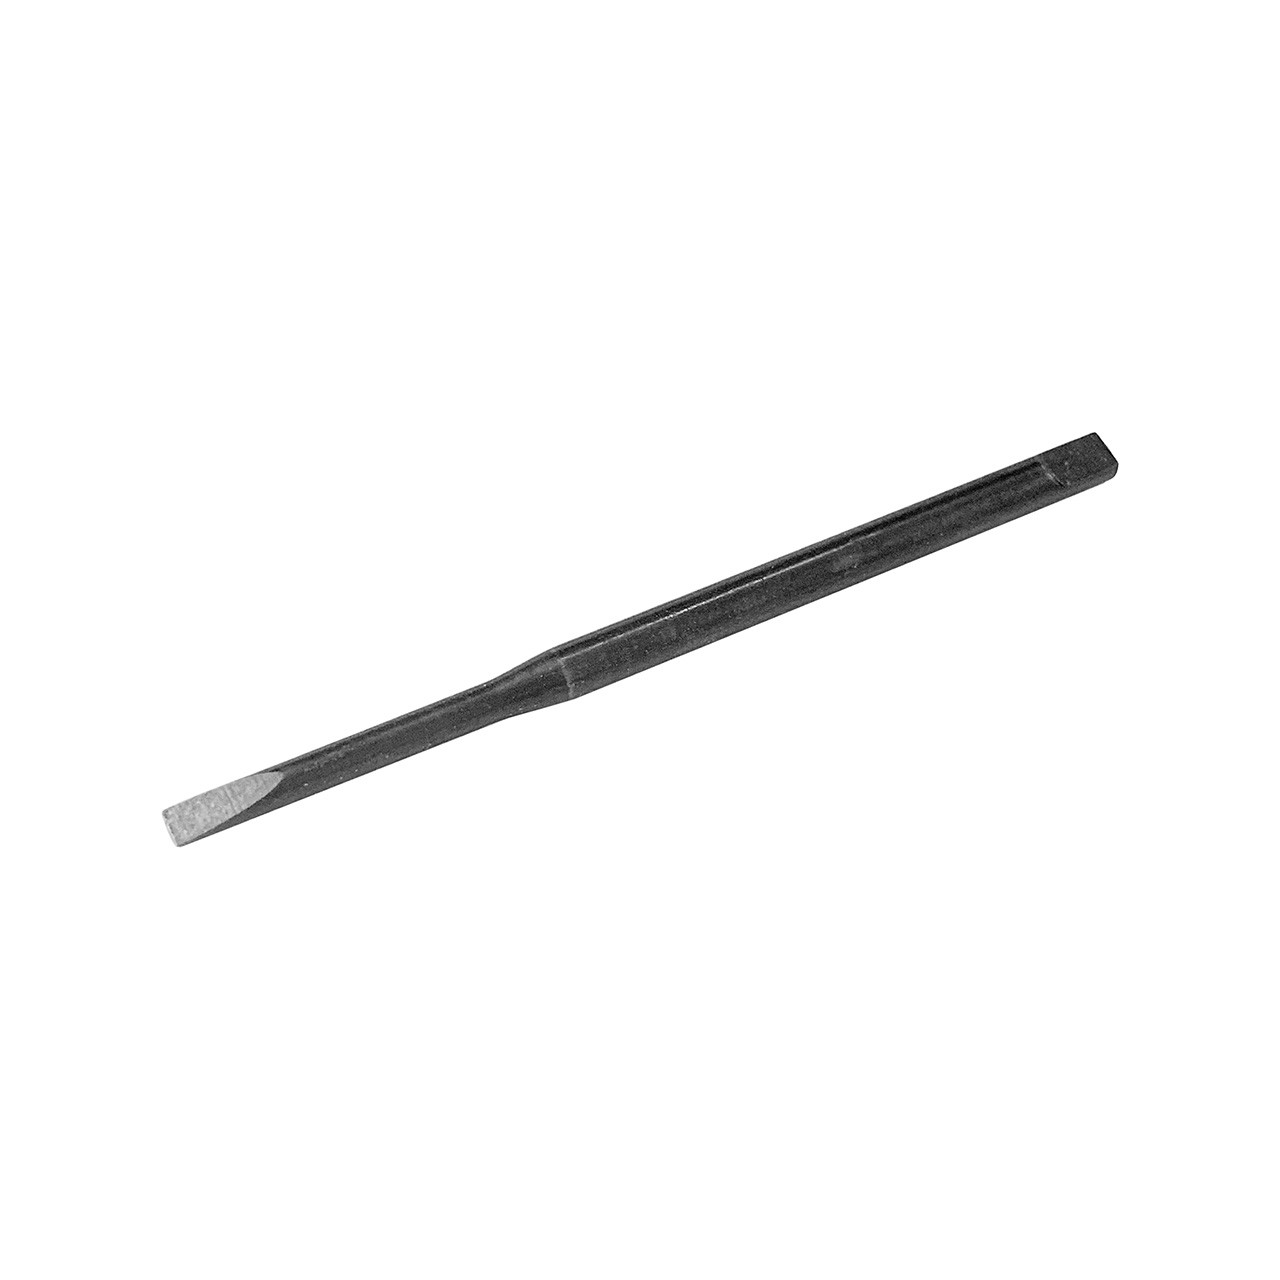 Repl. 0.070" Blades (Pkg. of 3) for 8209000